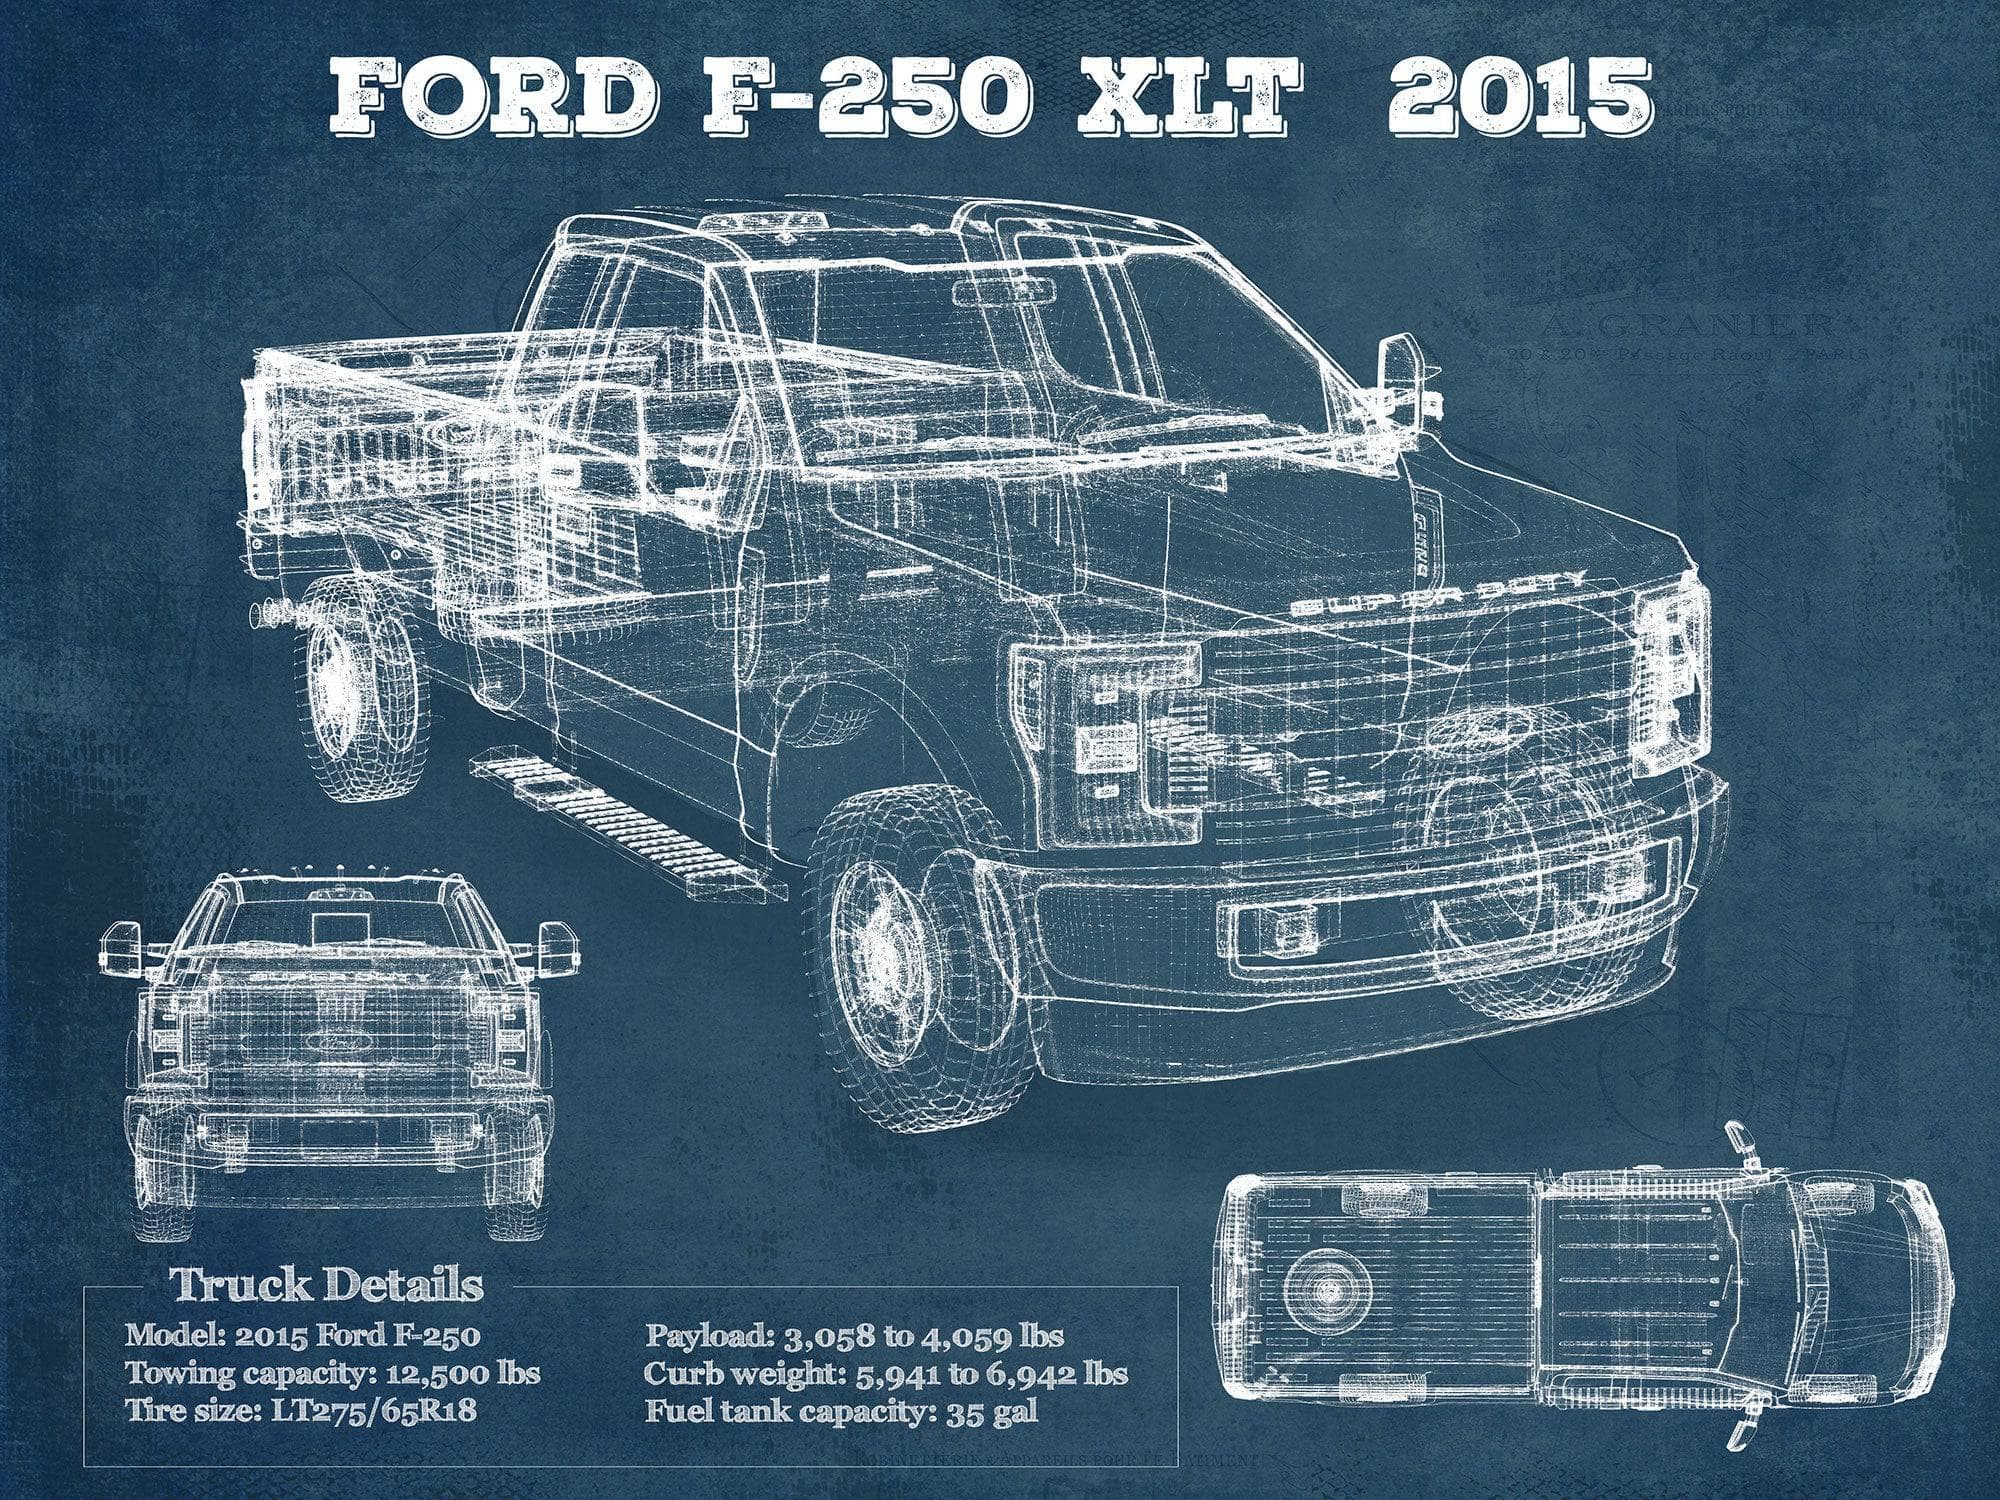 Cutler West Ford Collection 14" x 11" / Unframed Ford F-250 XLT (2015) Vintage Blueprint Auto Print 845000170_59825